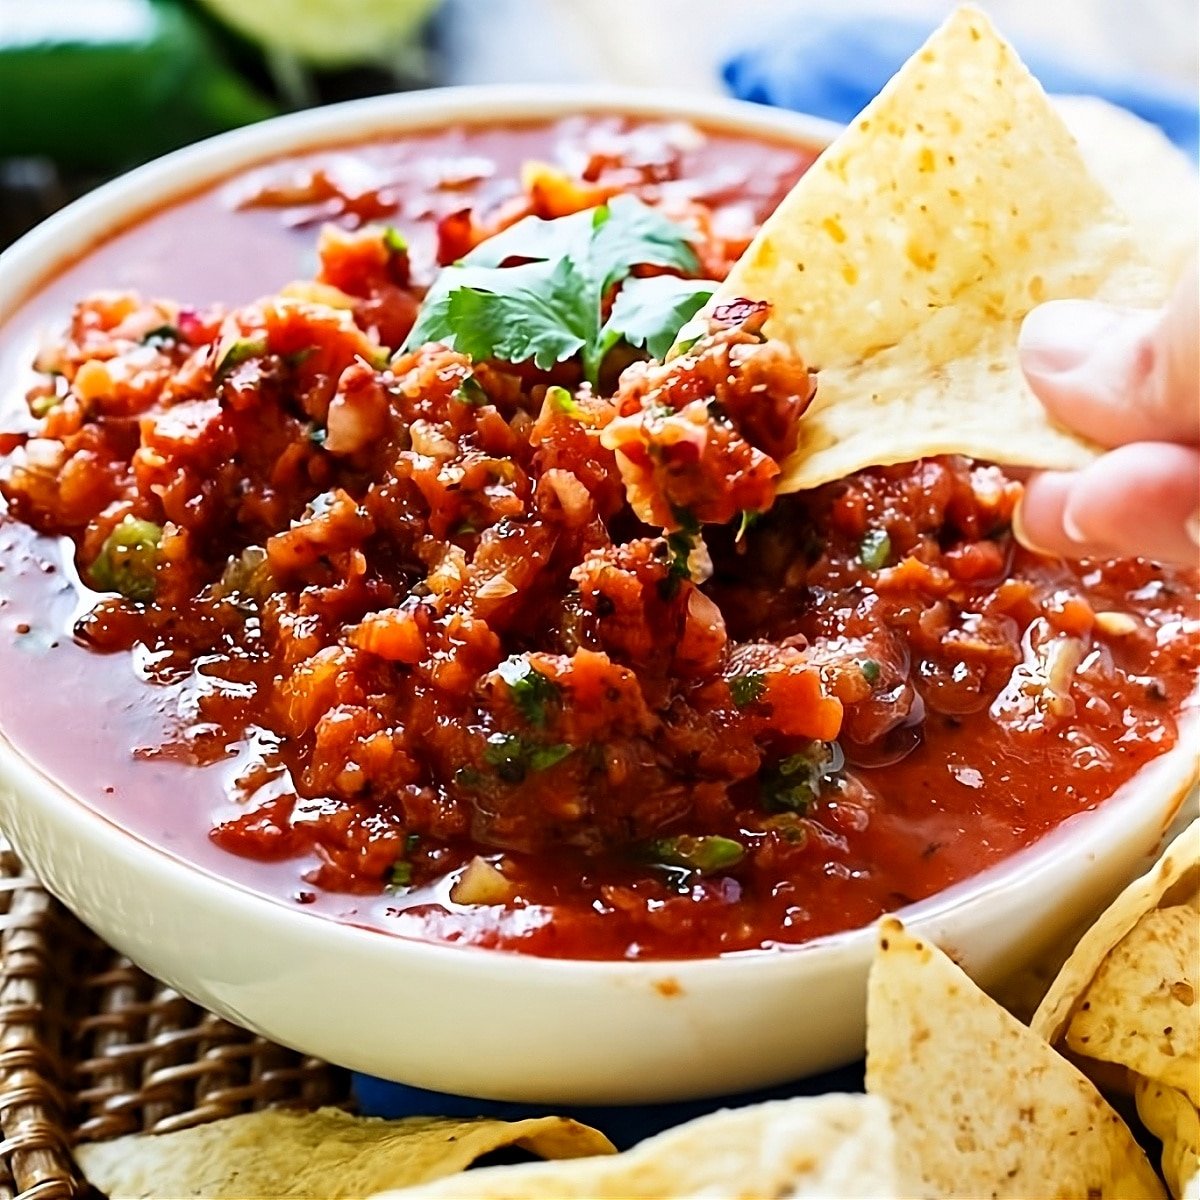 Chip dipping into fire-roasted salsa.